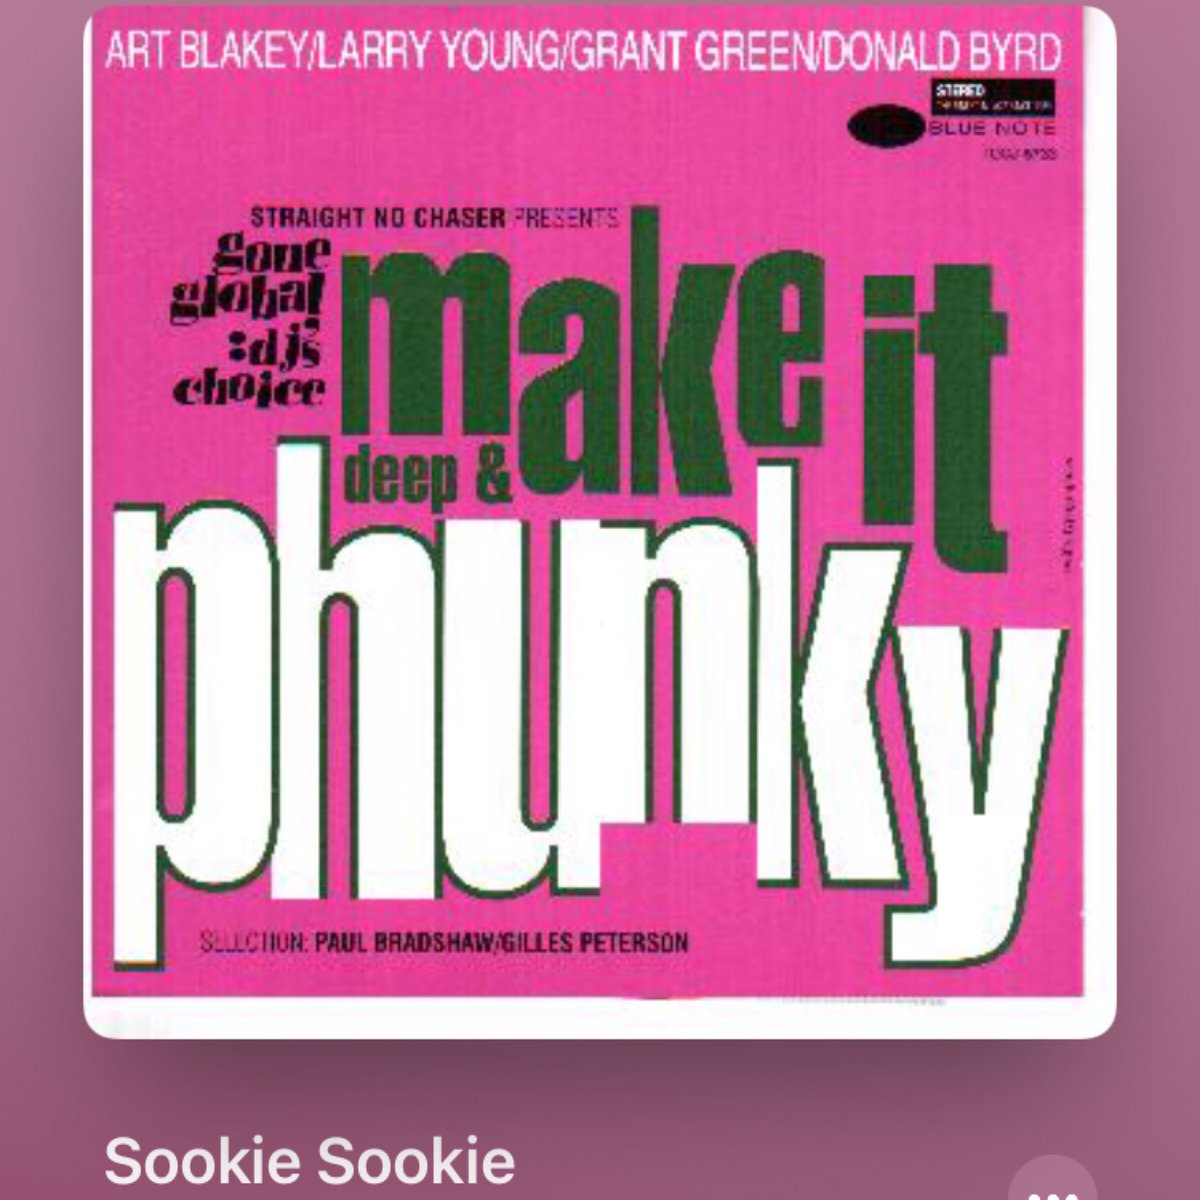 #NowPlaying
🎵 Sookie Sookie
by 🎵 Grant Green
from 🎵 Make It Phunky
#GrantGreen
#Jazz #guitar #jazzfunk #bluenote 
#DonCovay #SteveCropper
#タイポジャケ #桃ジャケ